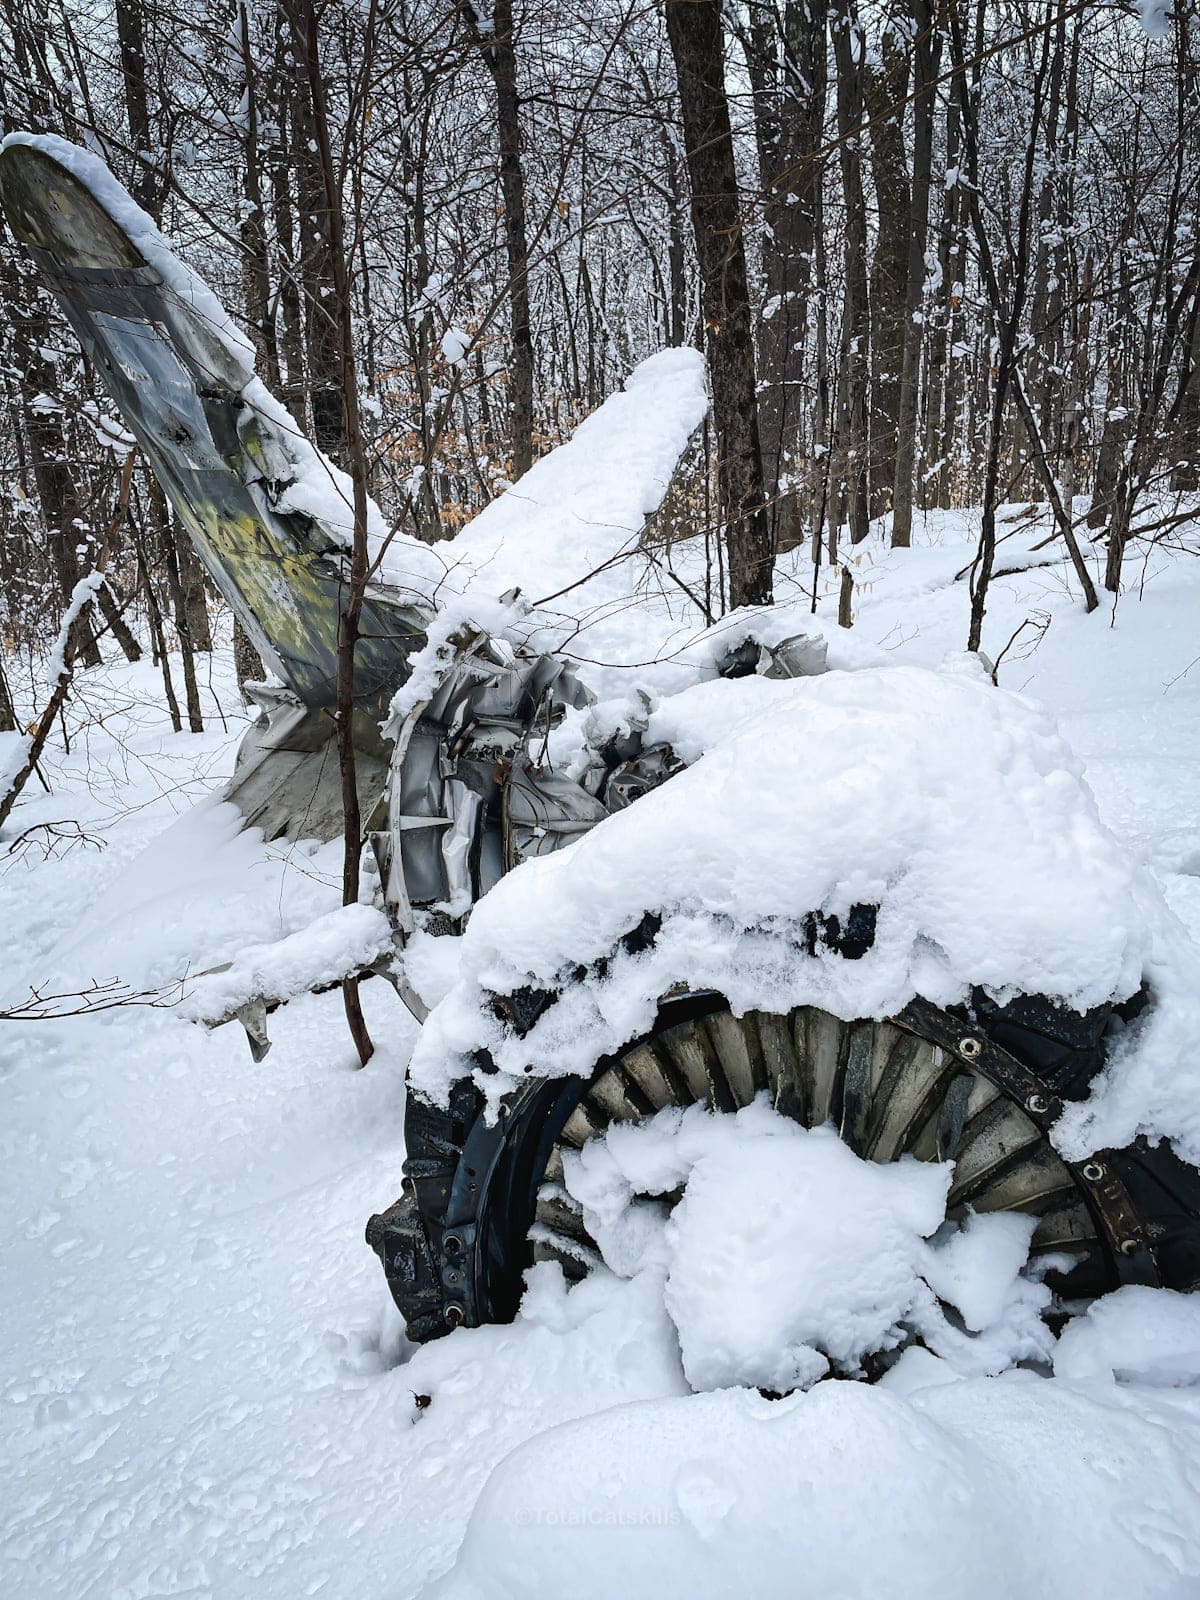 jet engine wreck in winter, covered in snow